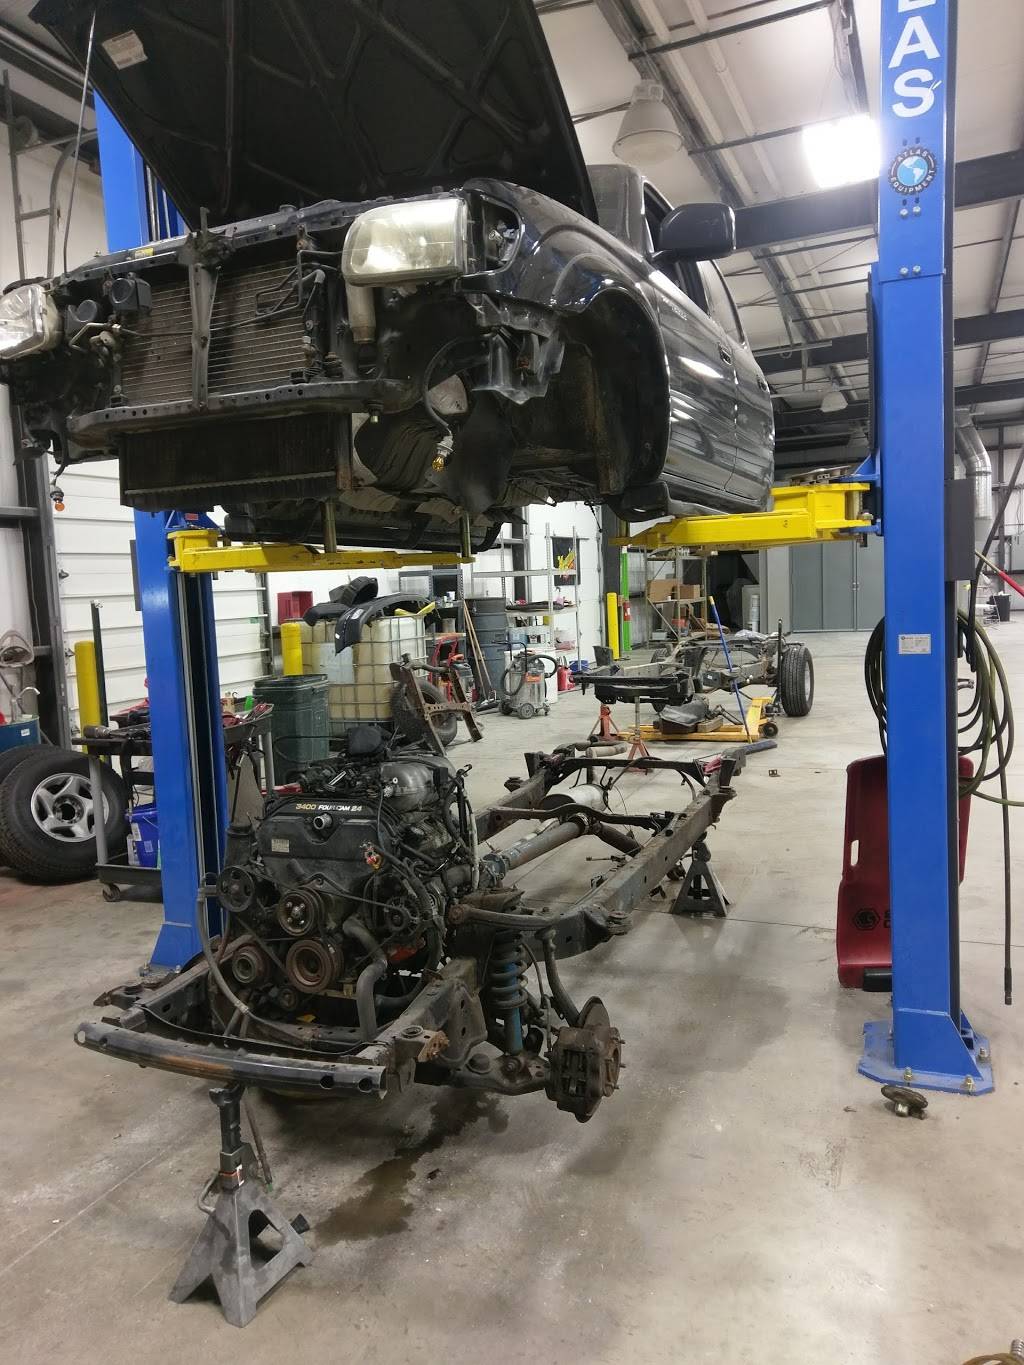 Central Ohio Auto Body and Repair | 7637 Commerce Pl, Plain City, OH 43064 | Phone: (614) 504-5130